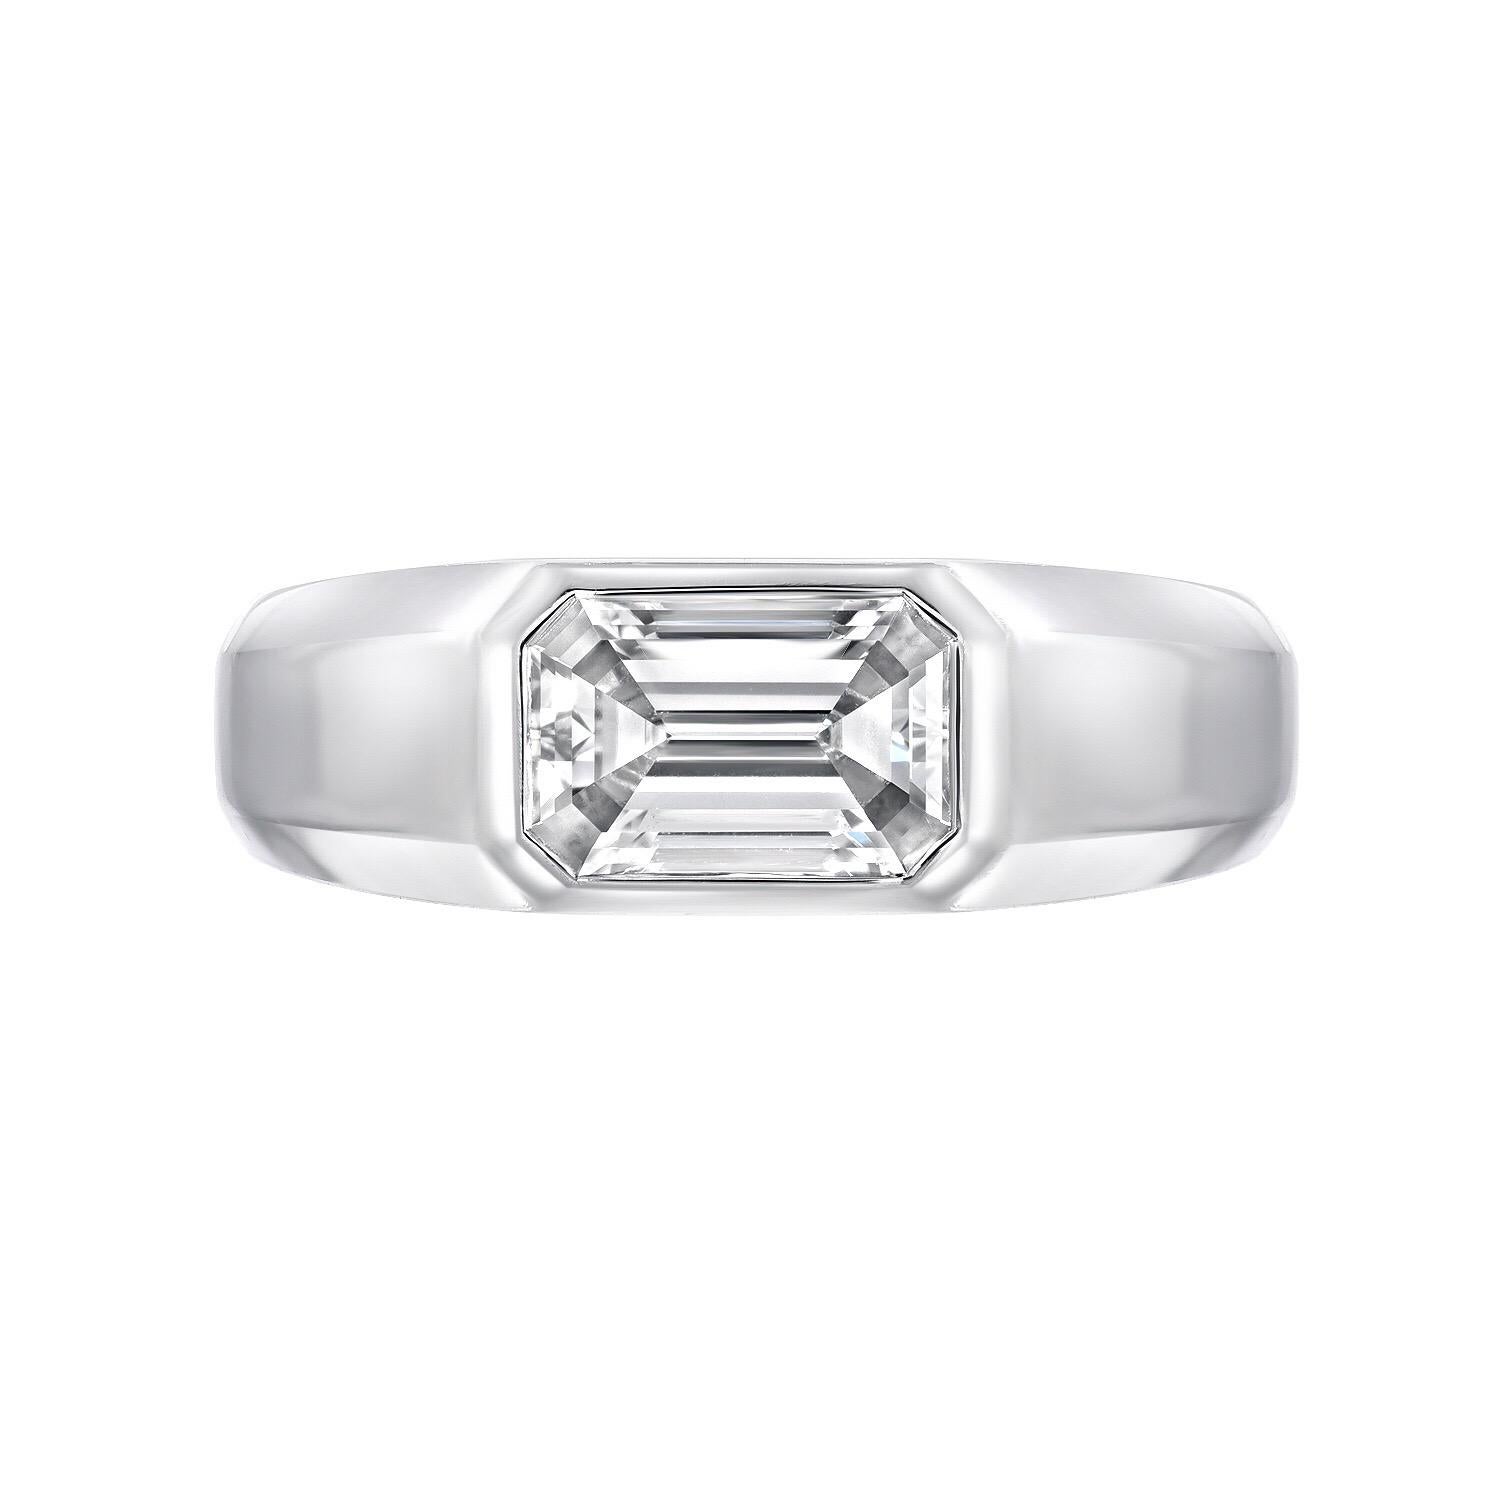 Women's or Men's Diamond Ring Emerald Cut 1.13 Carat H Color VS1 Clarity GIA Certified For Sale